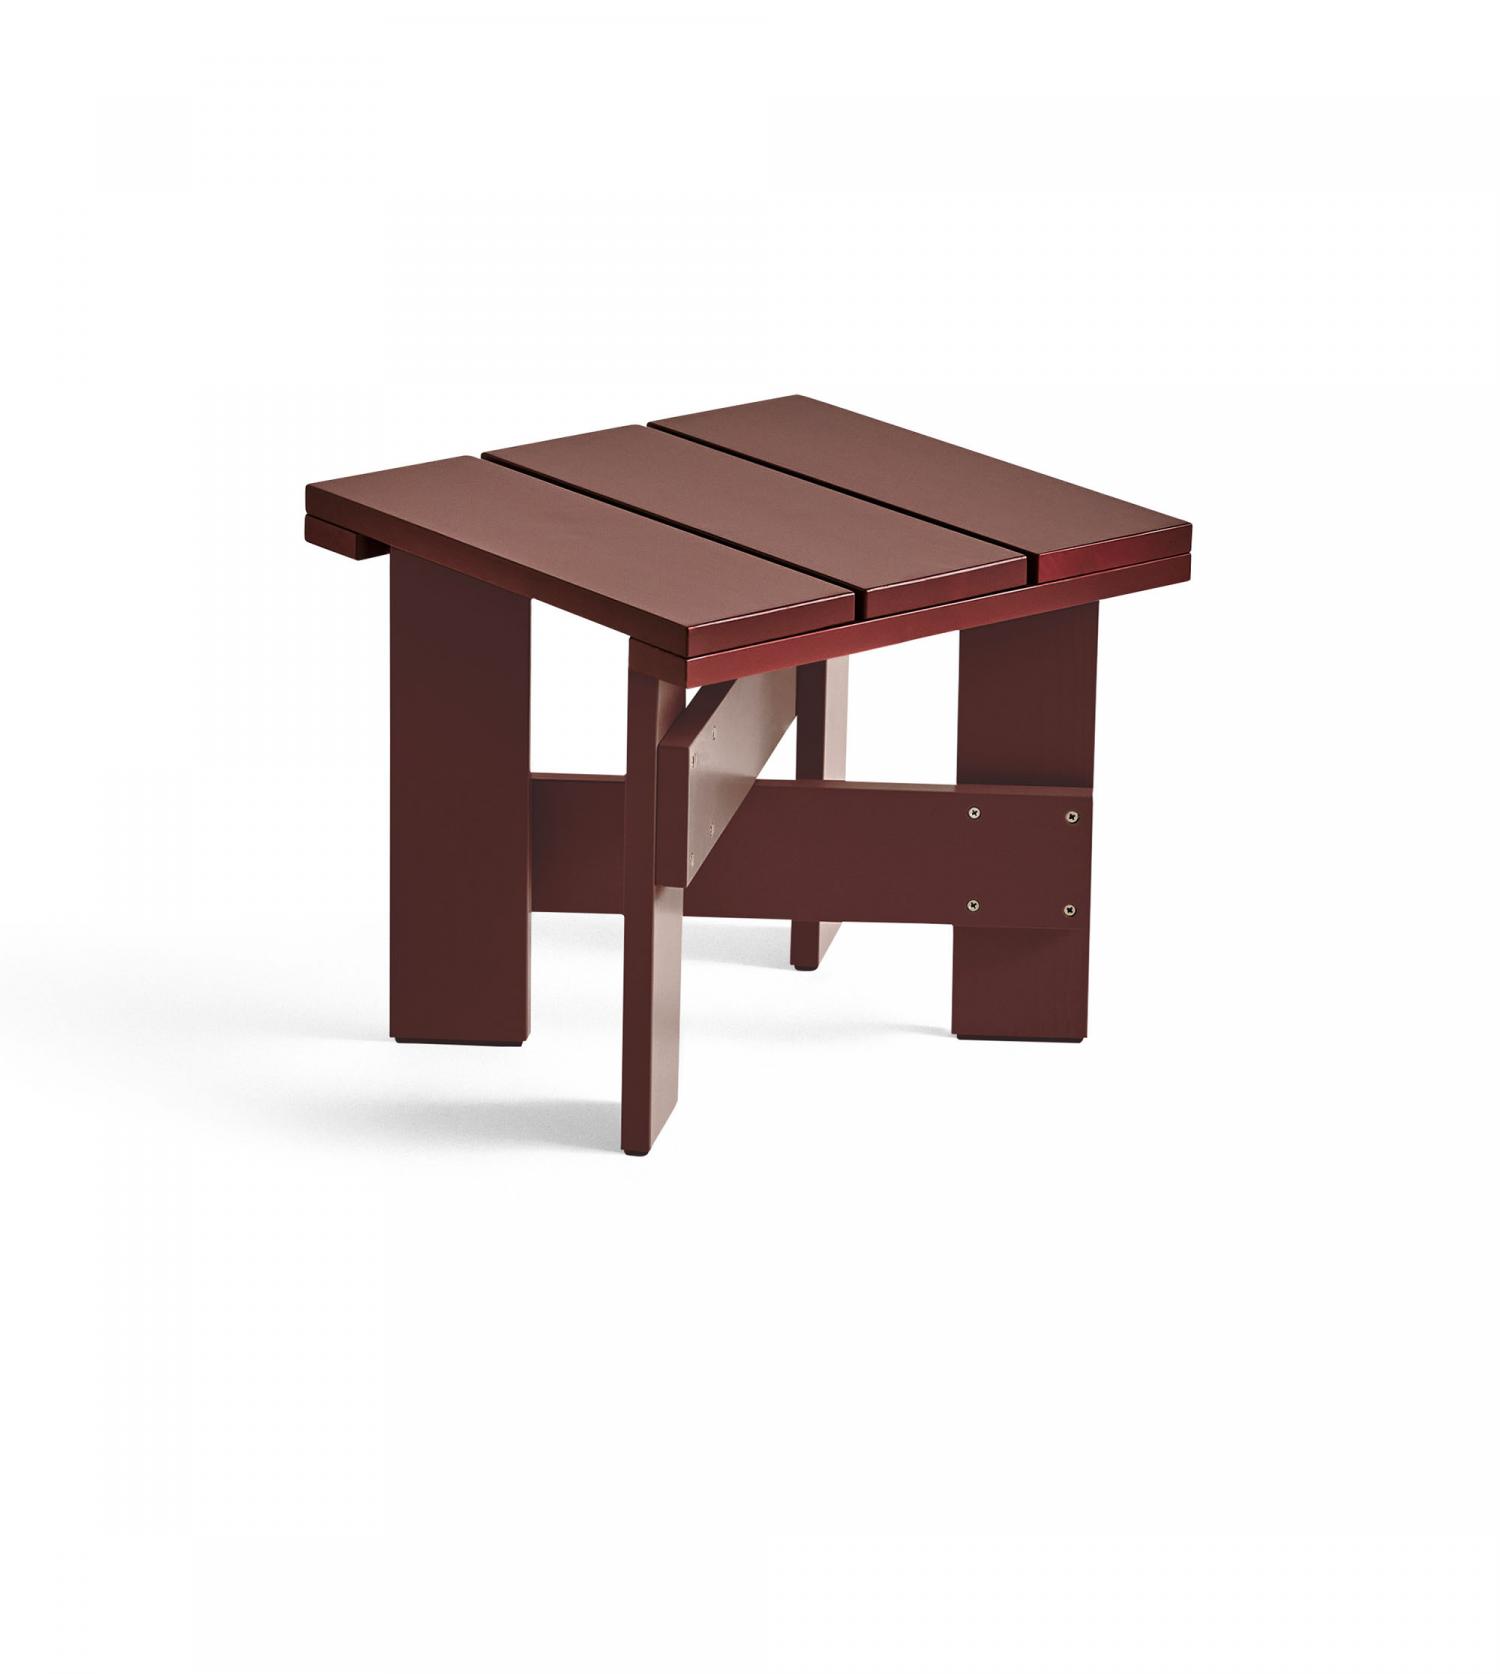 Crate low table